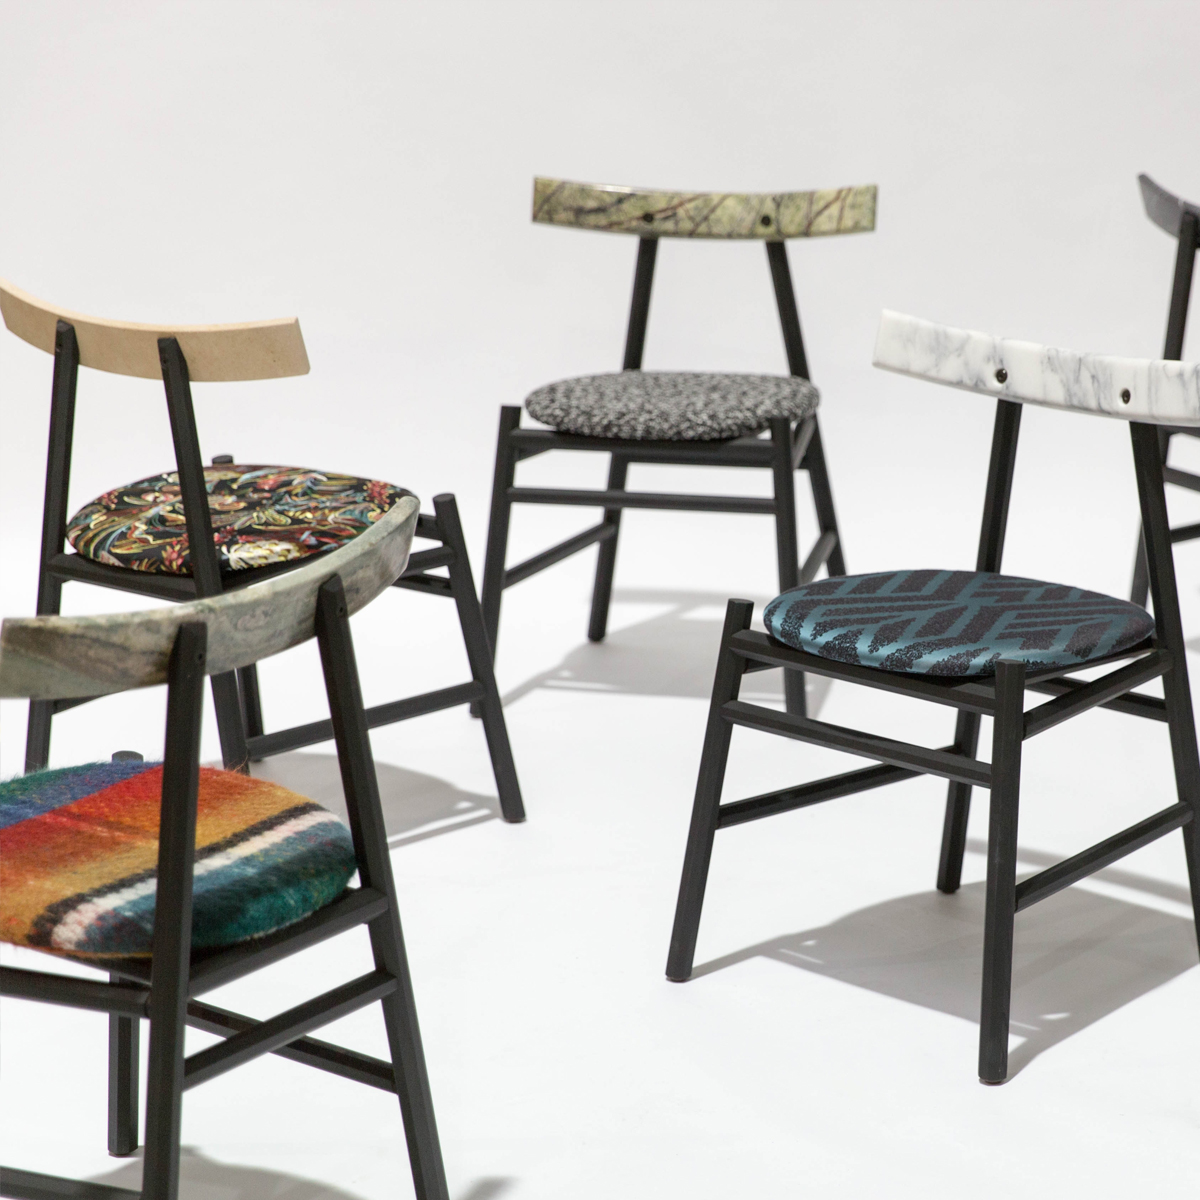 The Material Chairs